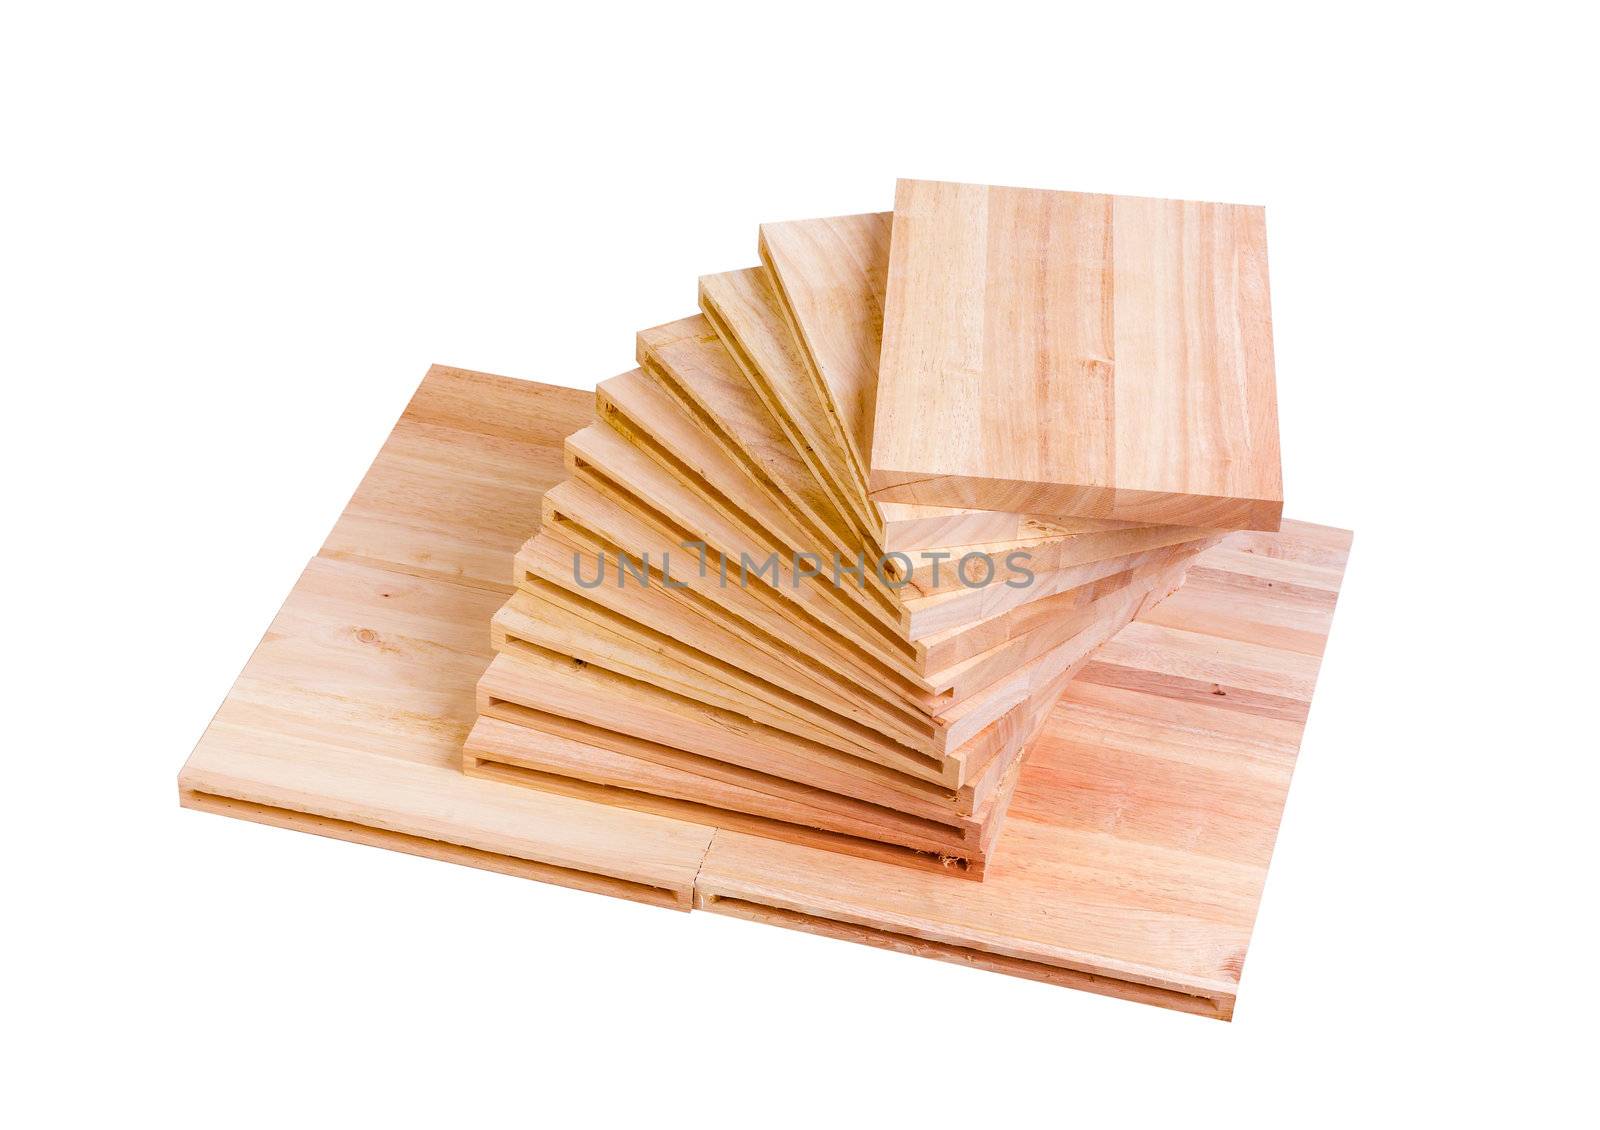 Pieces of pine wood arranges and isolated on white  by john_kasawa